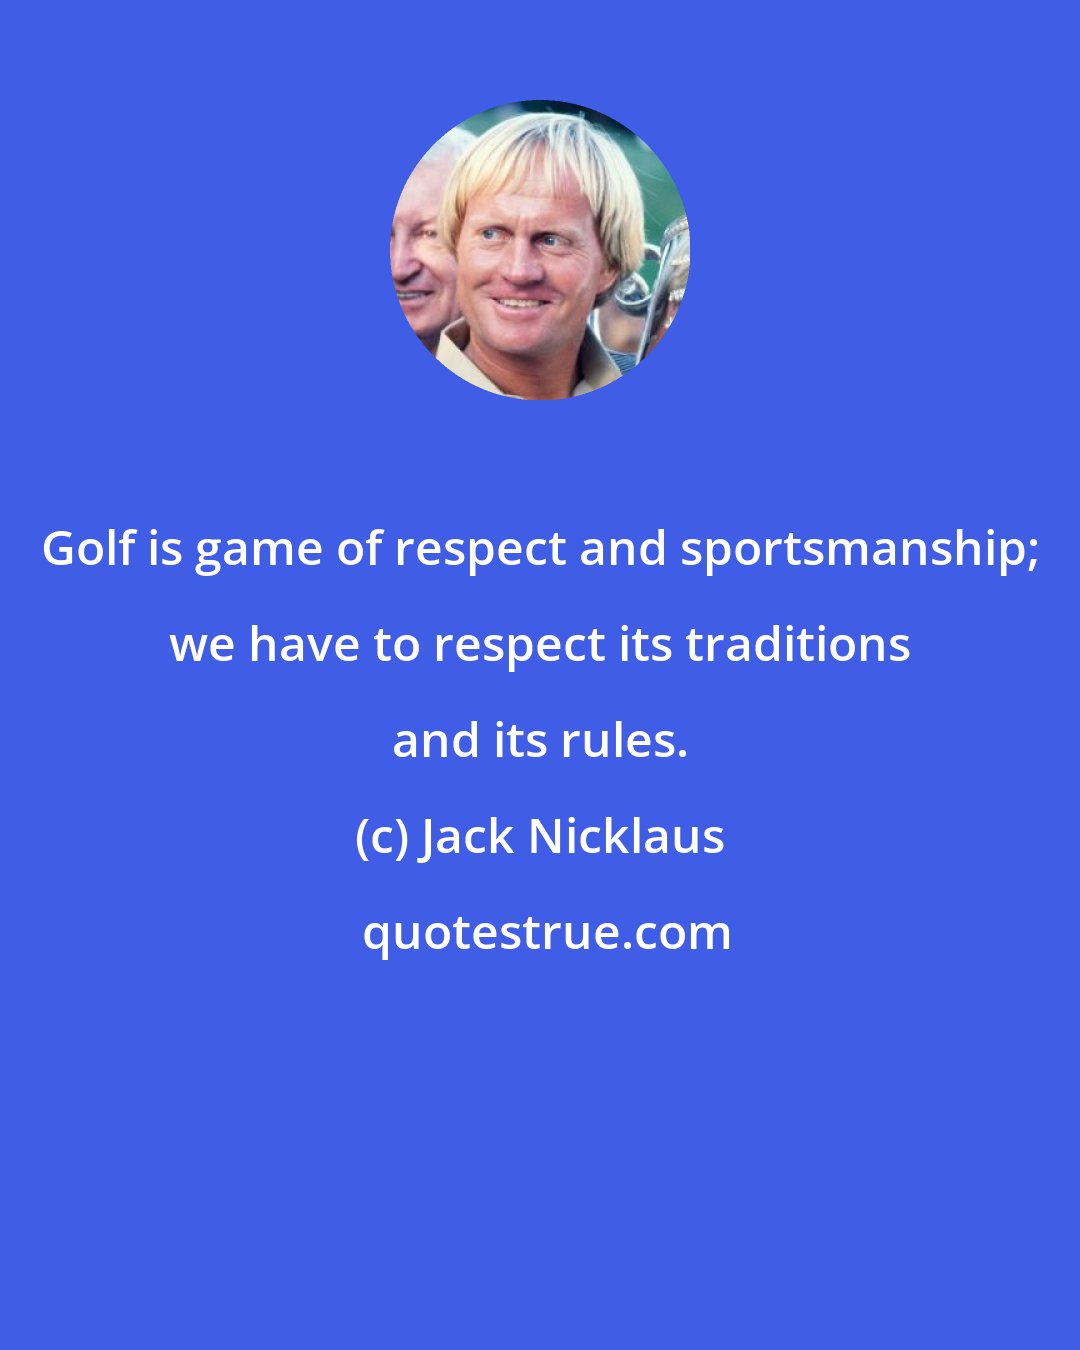 Jack Nicklaus: Golf is game of respect and sportsmanship; we have to respect its traditions and its rules.